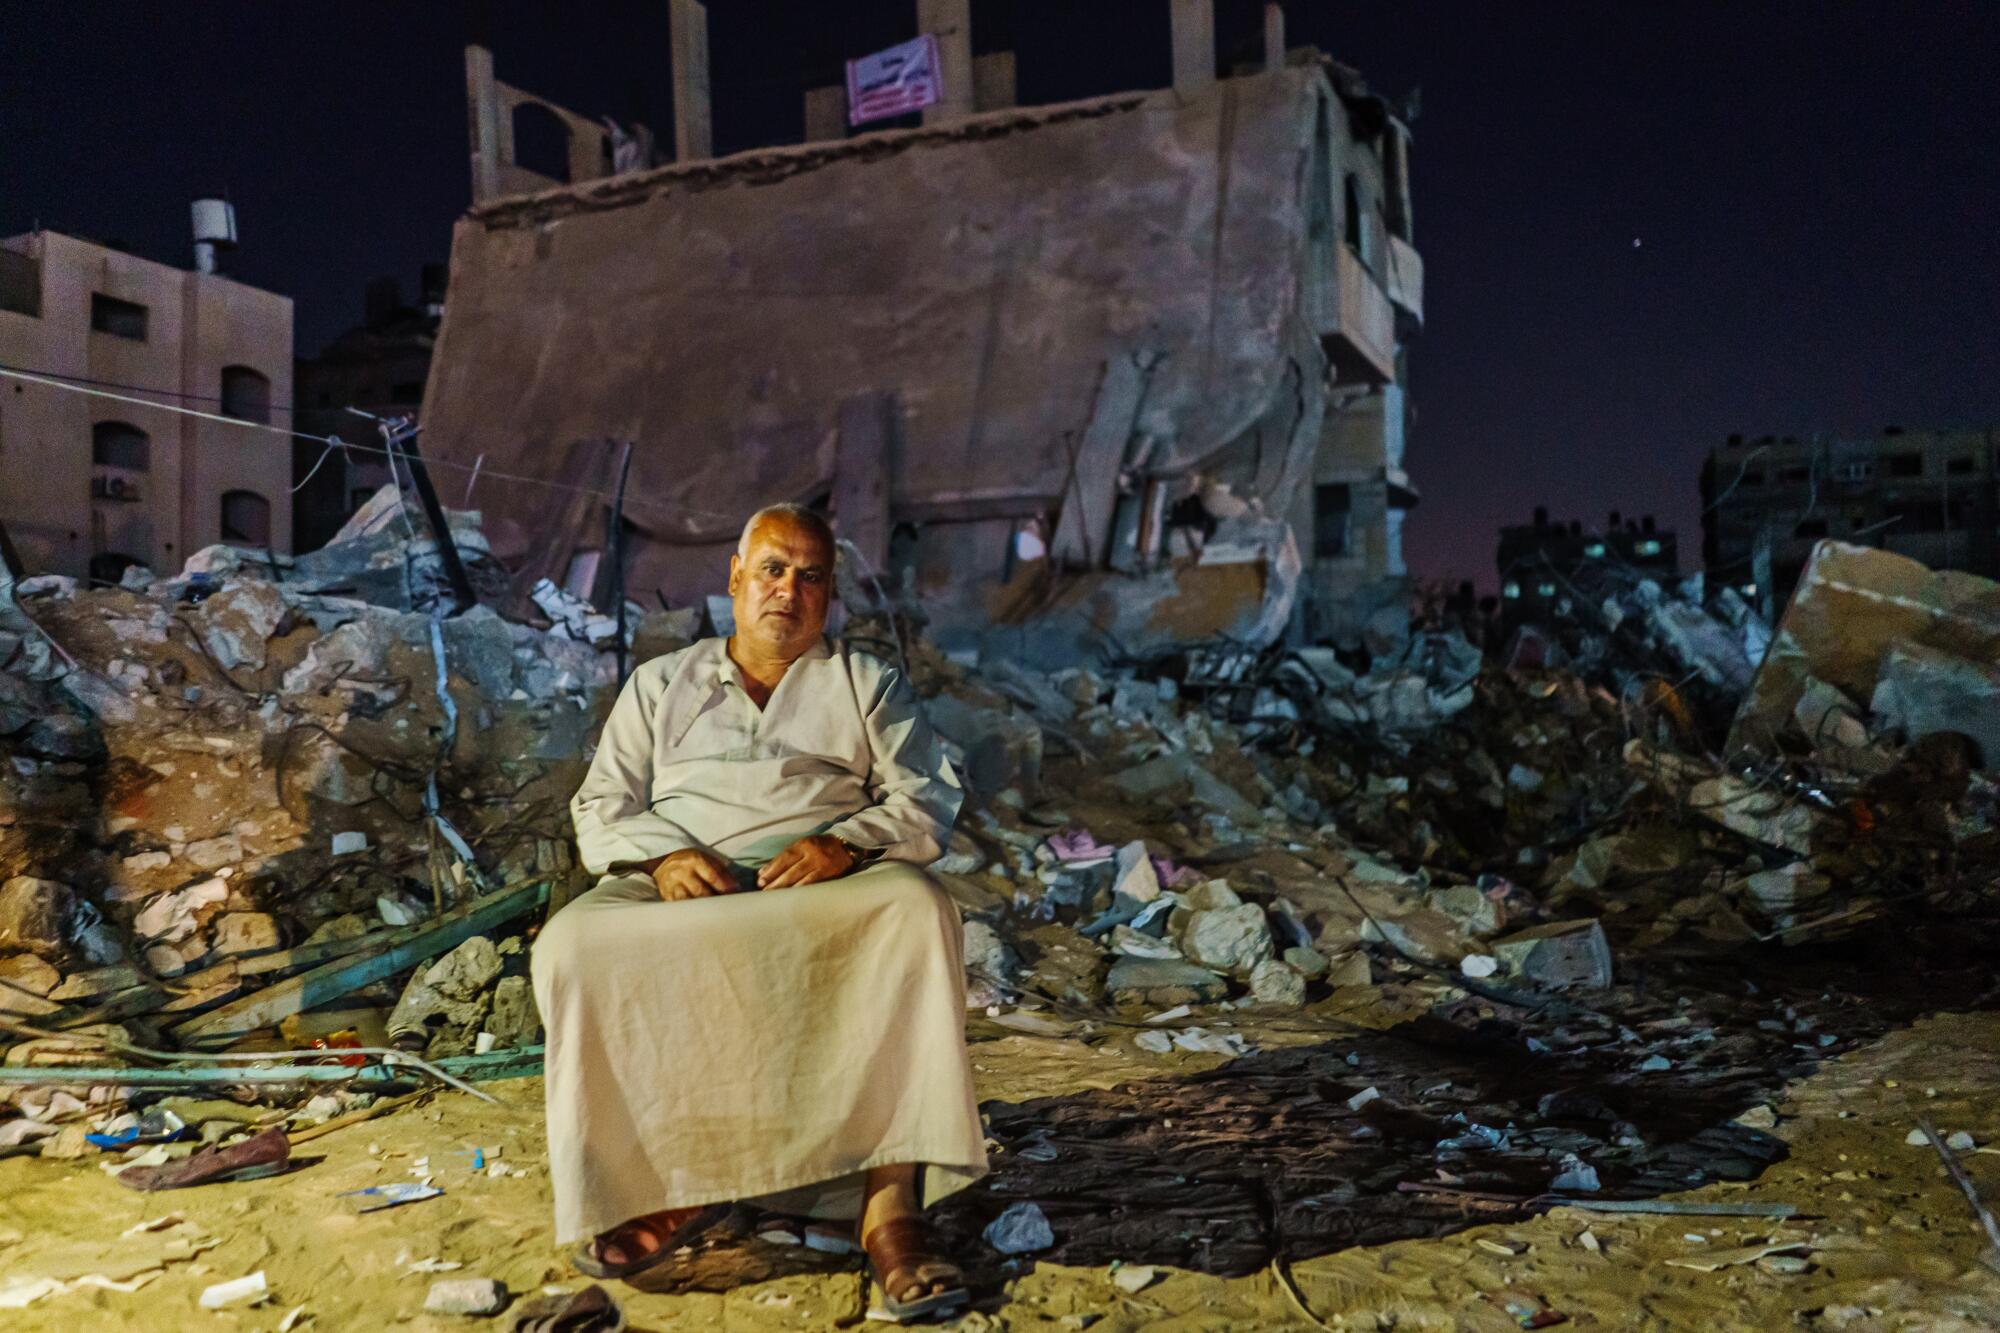 Rabah Al-Madhoun sits in front of the remains of his building in Gaza City.